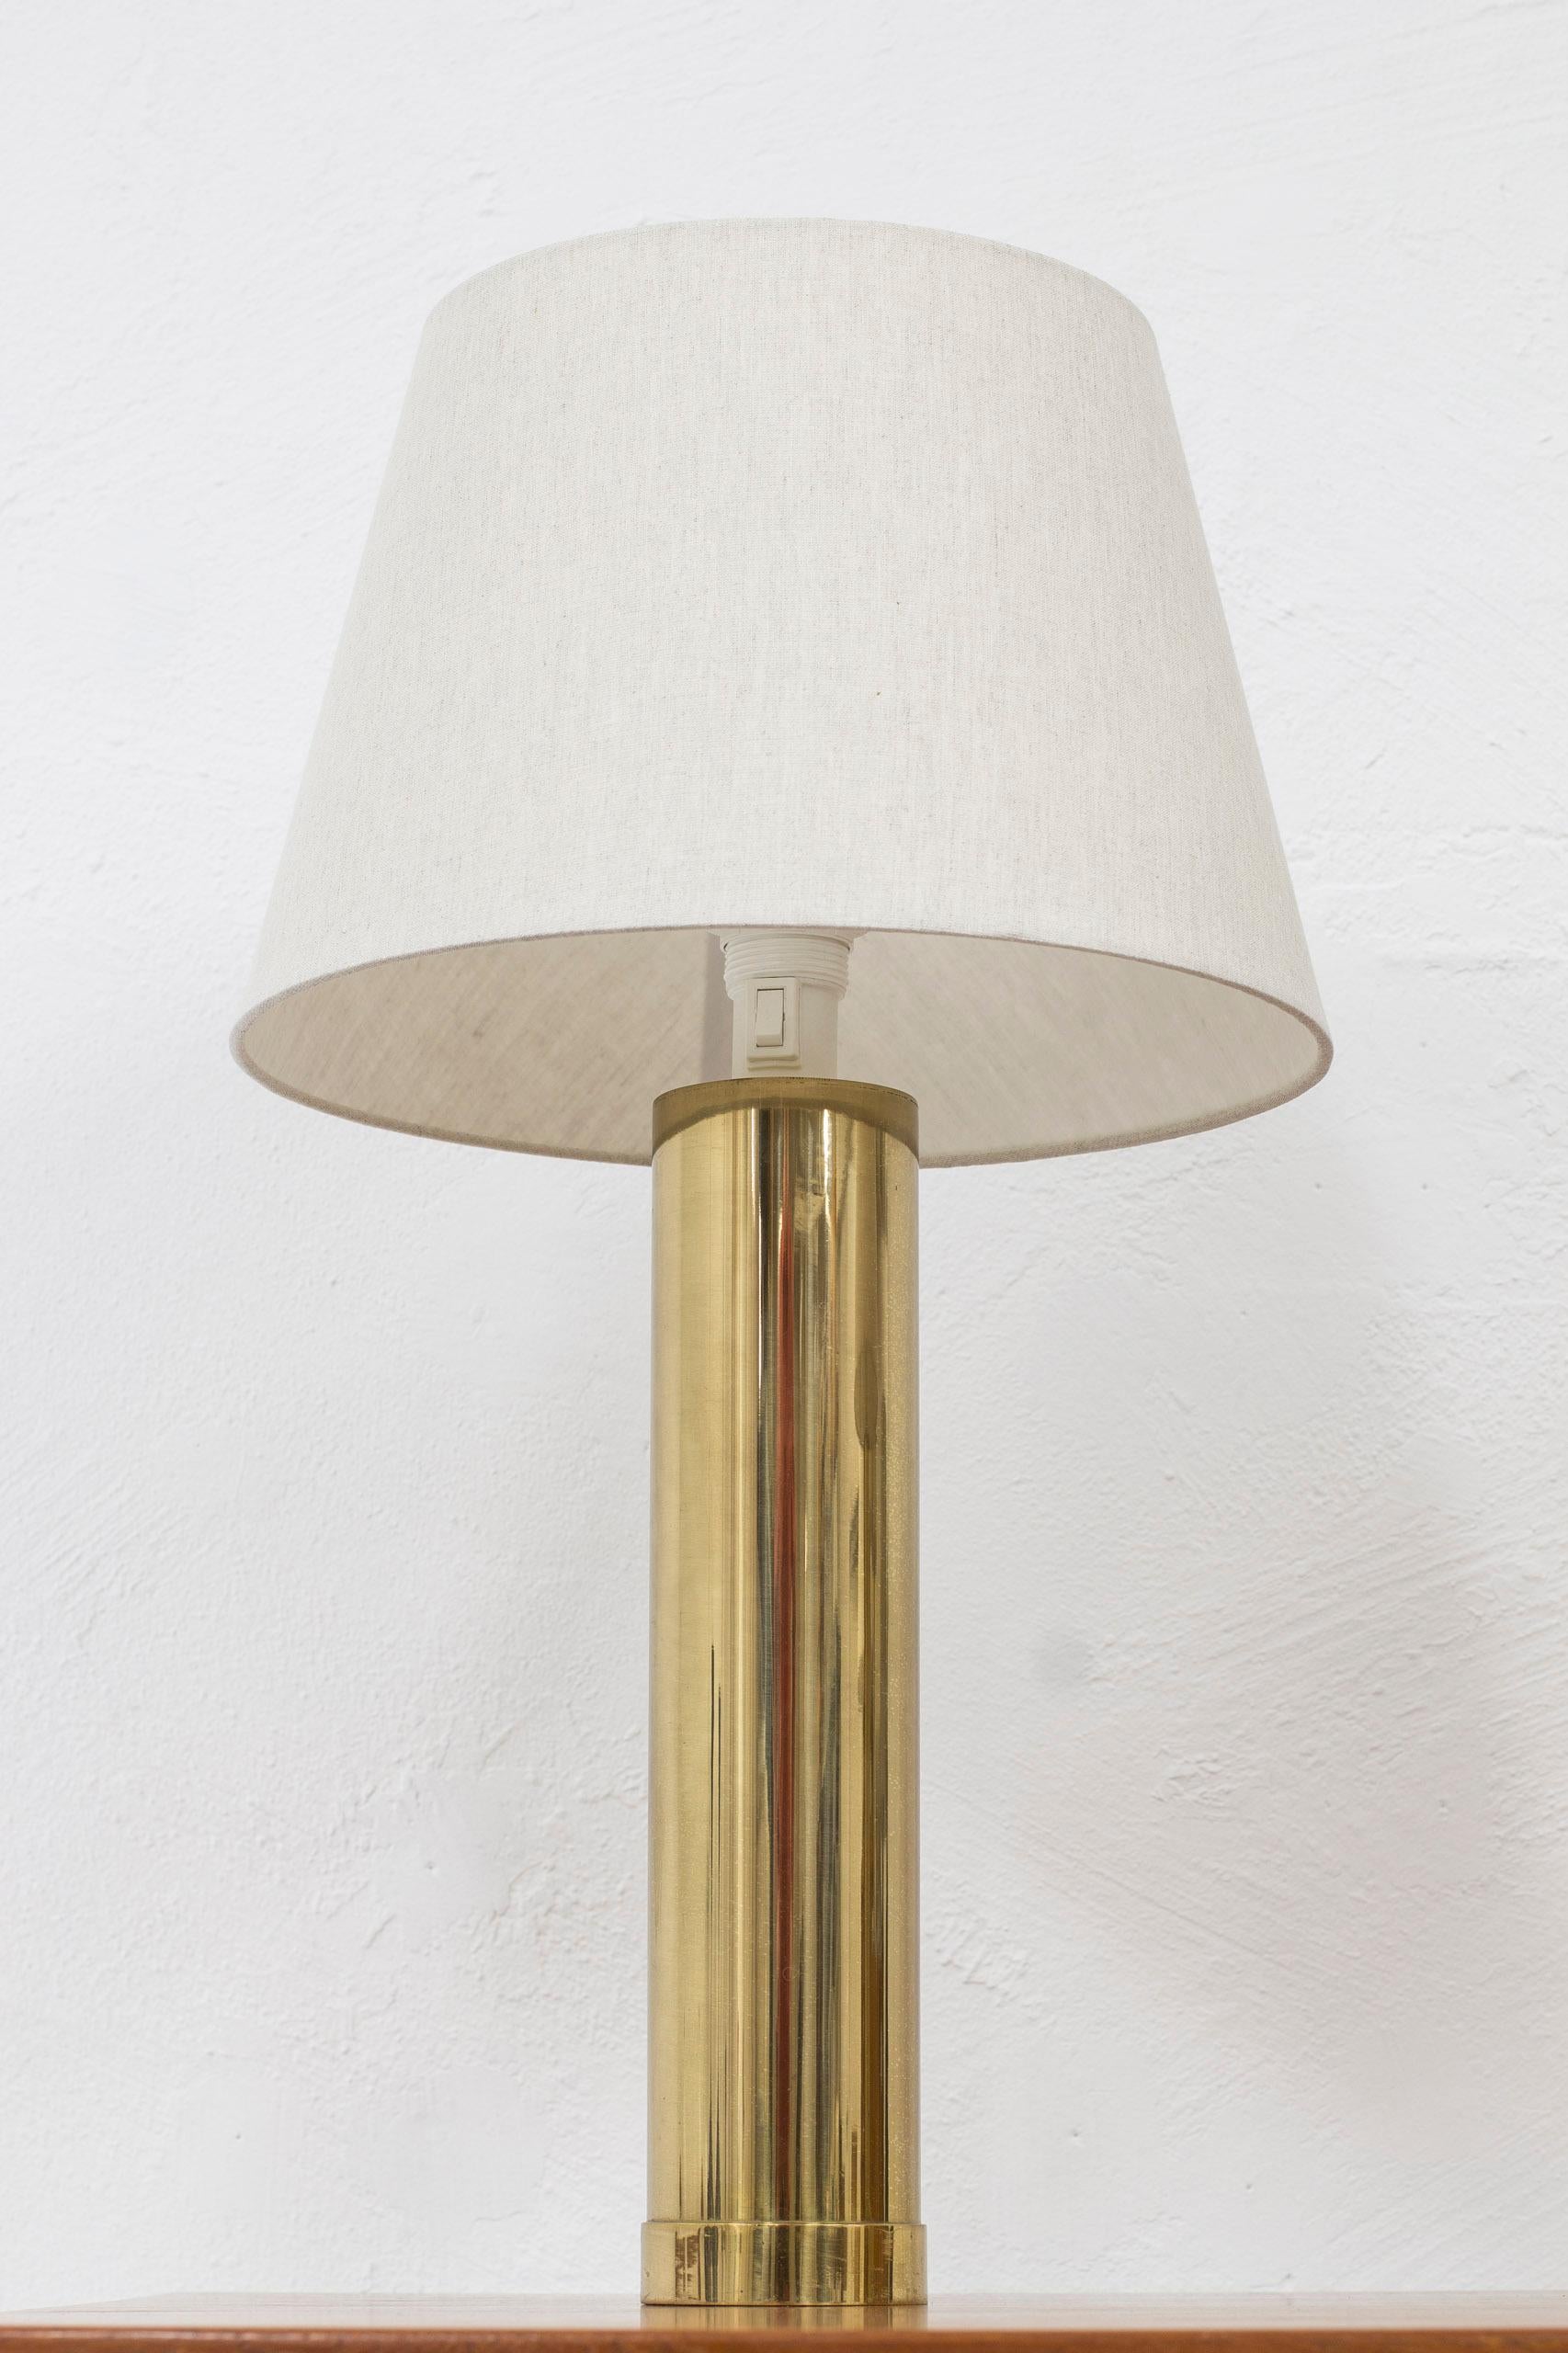 Mid-20th Century Pair of Brass Table Lamps by Bergboms, Sweden, 1960s, 4 Pcs Total For Sale